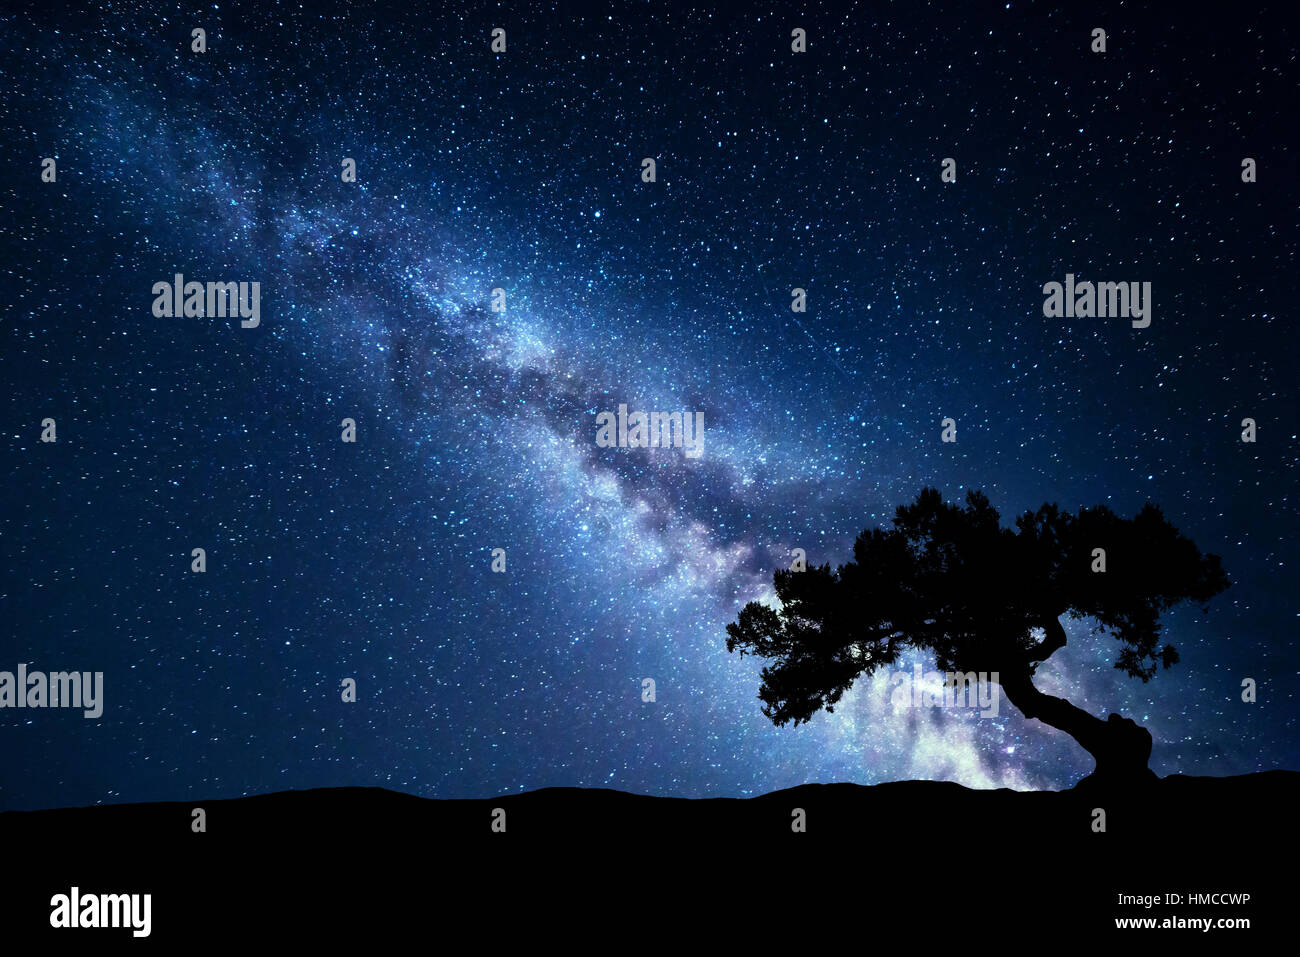 Tree against Milky Way. Night landscape. Night colorful scenery. Starry sky in summer. Beautiful universe. Space background Stock Photo